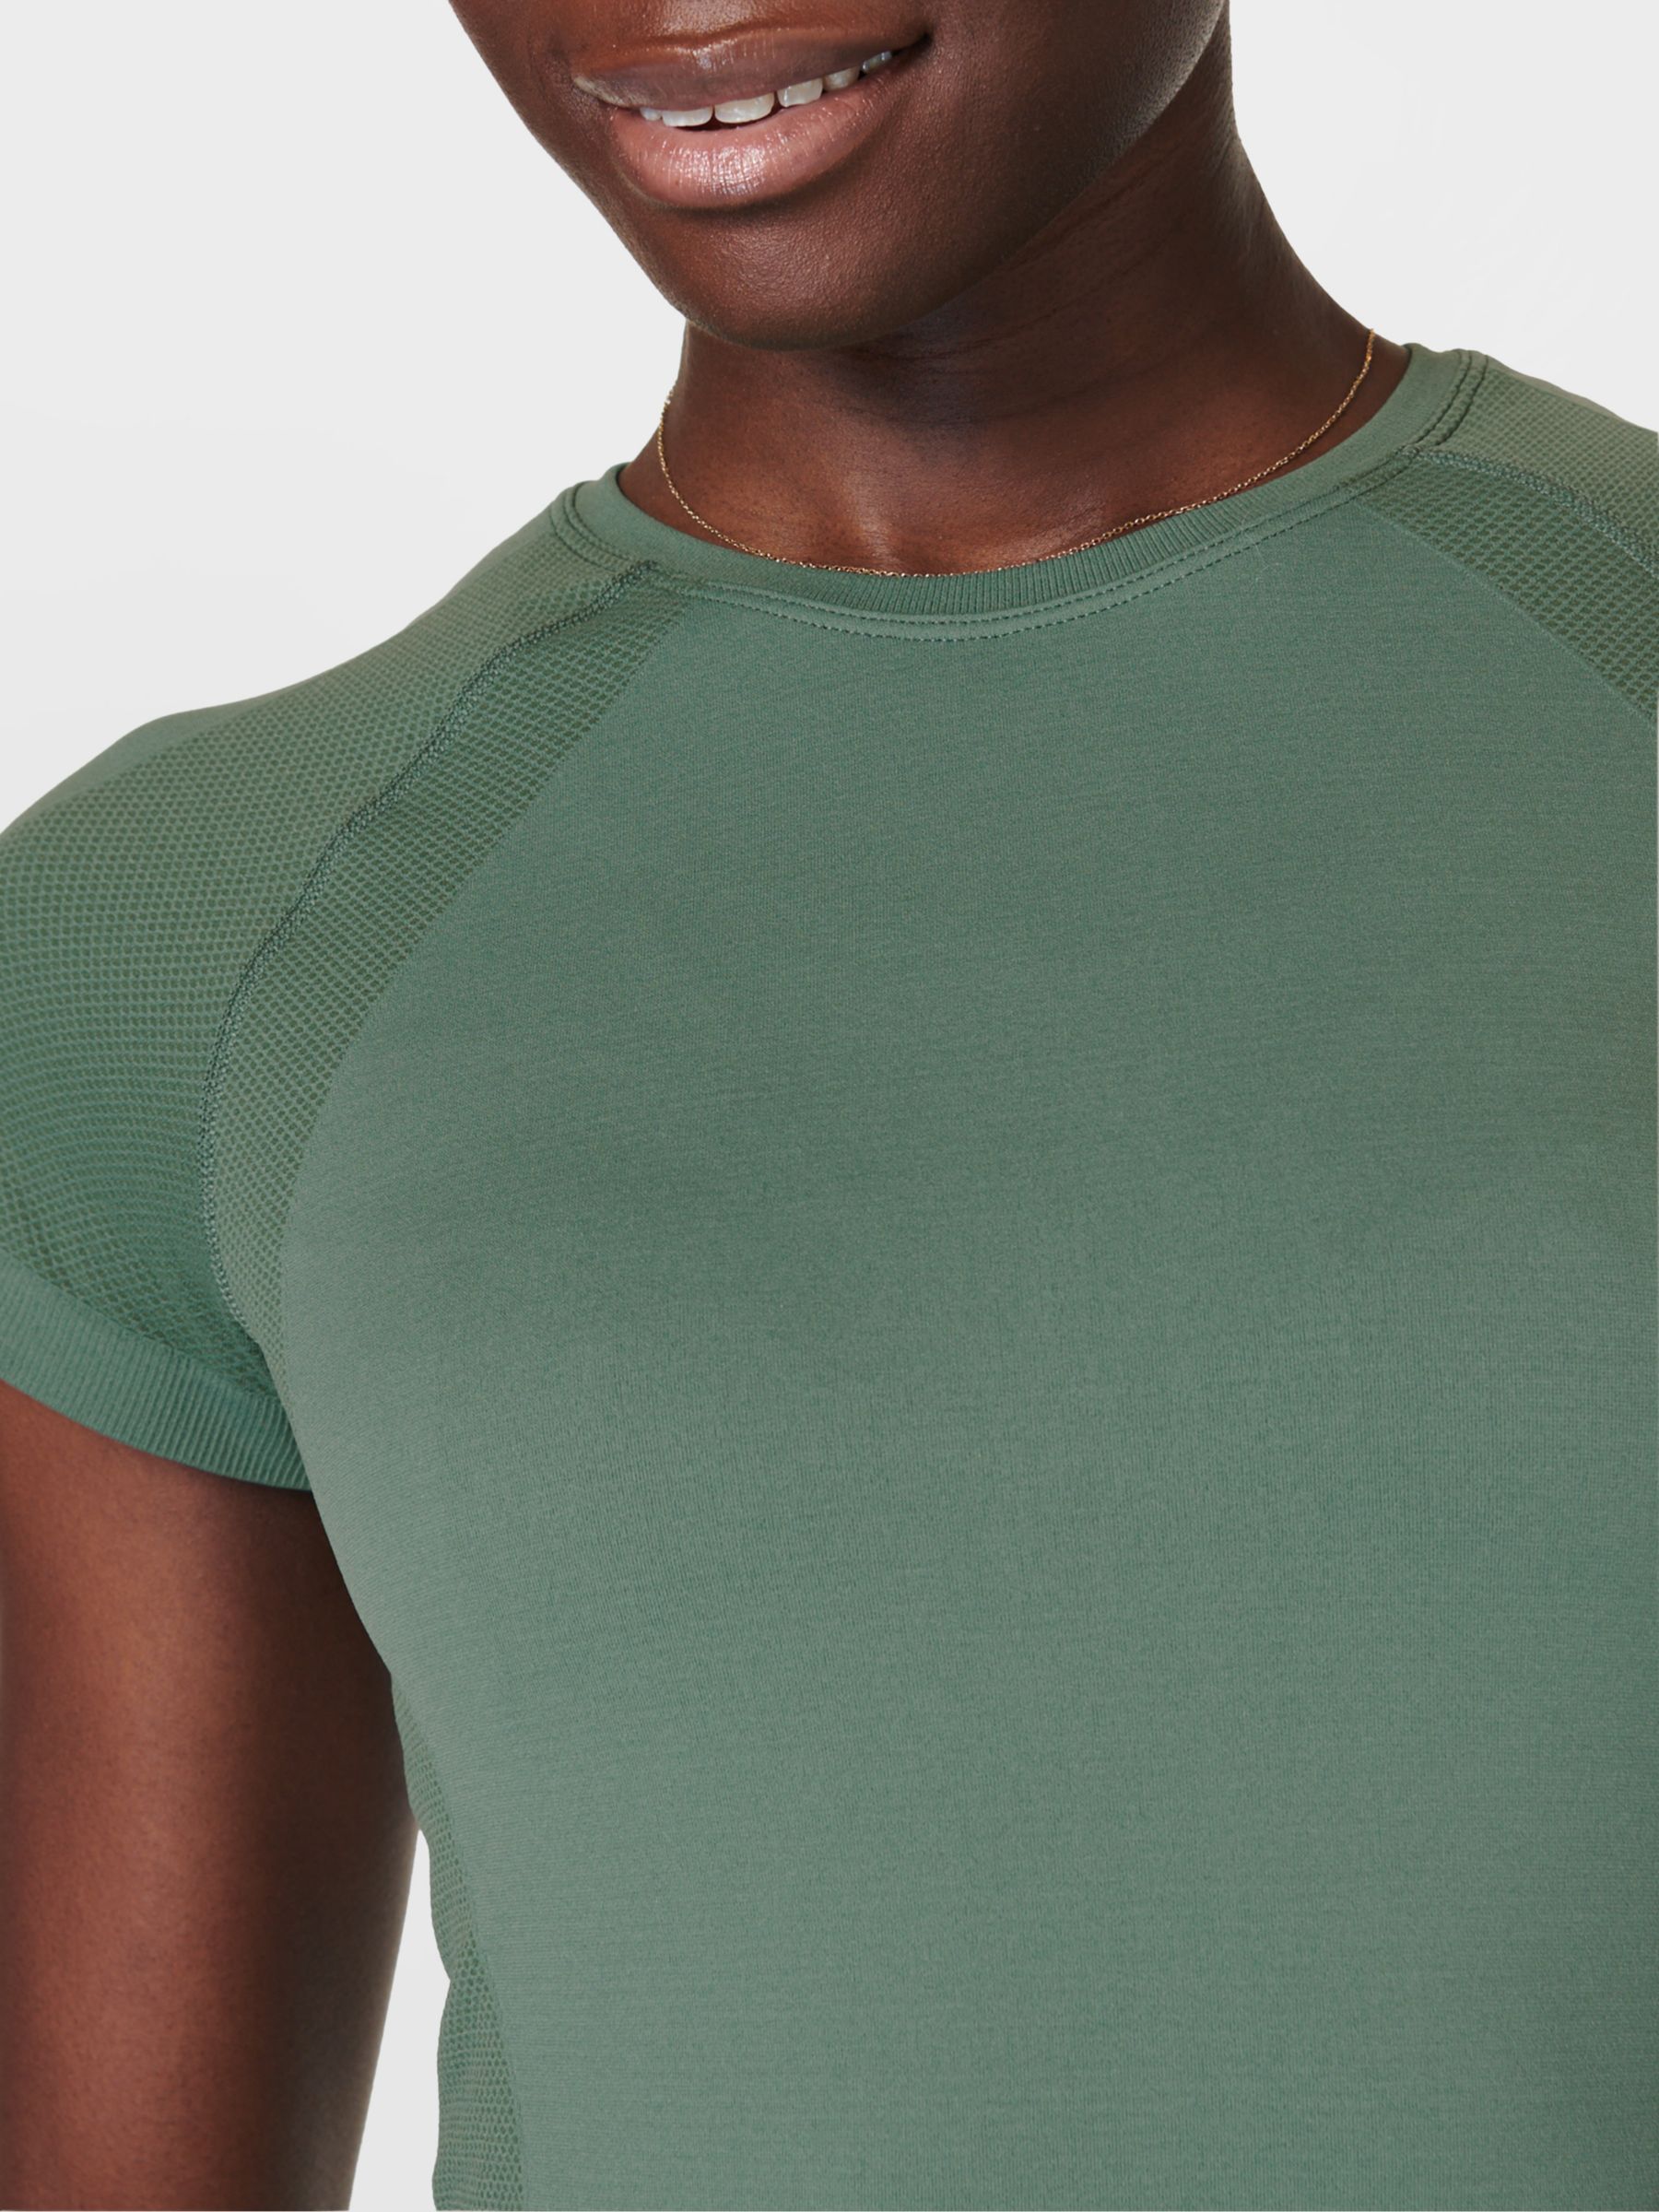 Sweaty Betty Athlete Seamless Top, Cool Forest Green, XS